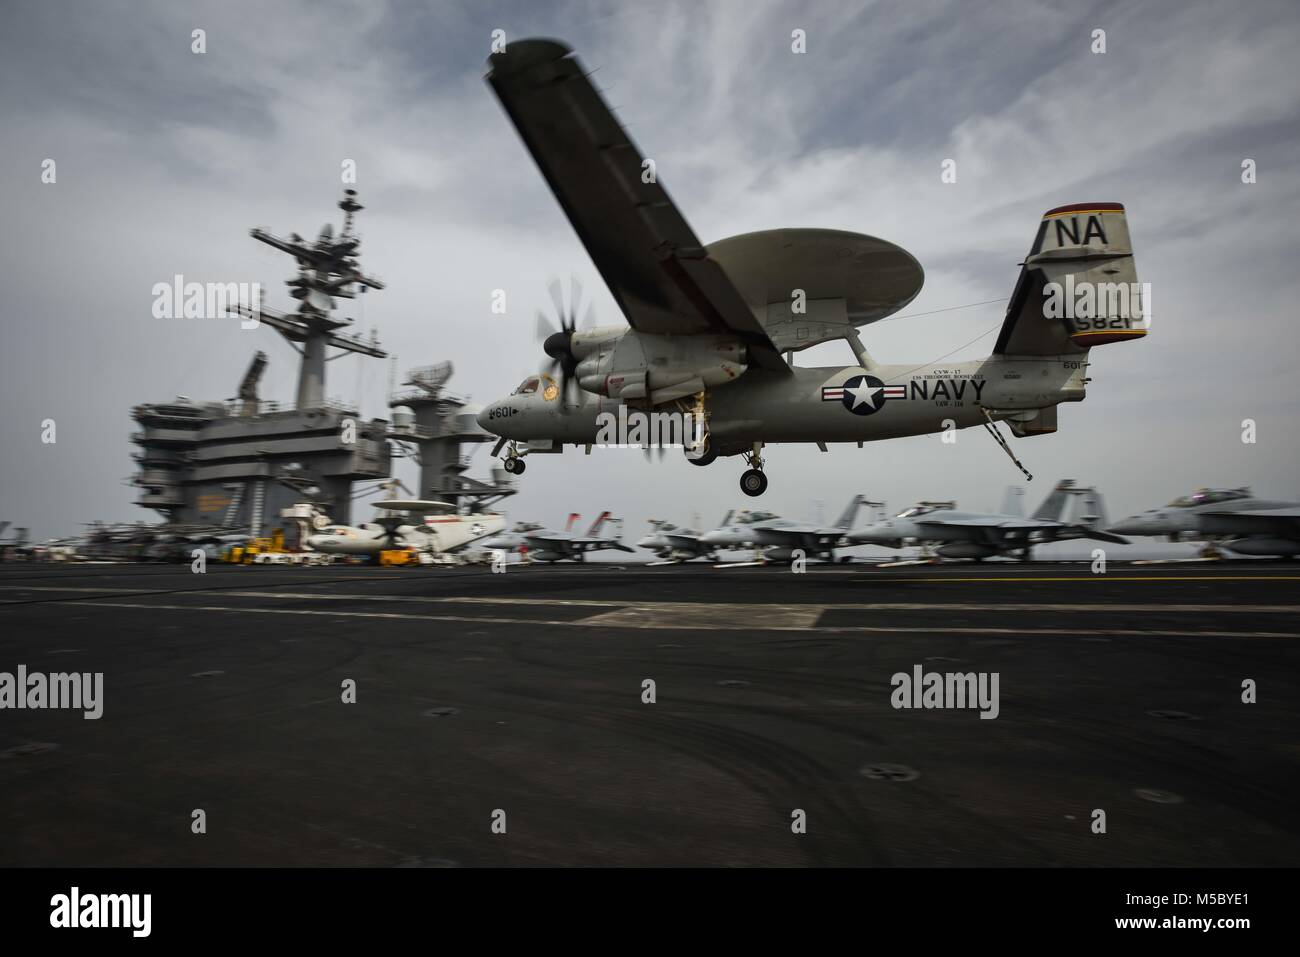 180221-N-VN584-1671 ARABIAN GULF (Feb. 21, 2018) An E-2C Hawkeye, assigned to the Sunkings of Carrier Airborne Early Warning Squadron (VAW) 116, approaches the flight deck of the aircraft carrier USS Theodore Roosevelt (CVN 71). Theodore Roosevelt and its carrier strike group are deployed to the U.S. 5th Fleet area of operations in support of maritime security operations to reassure allies and partners and preserve the freedom of navigation and the free flow of commerce in the region. (U.S. Navy photo by Mass Communication Specialist 3rd Class Alex Corona/Released) Stock Photo